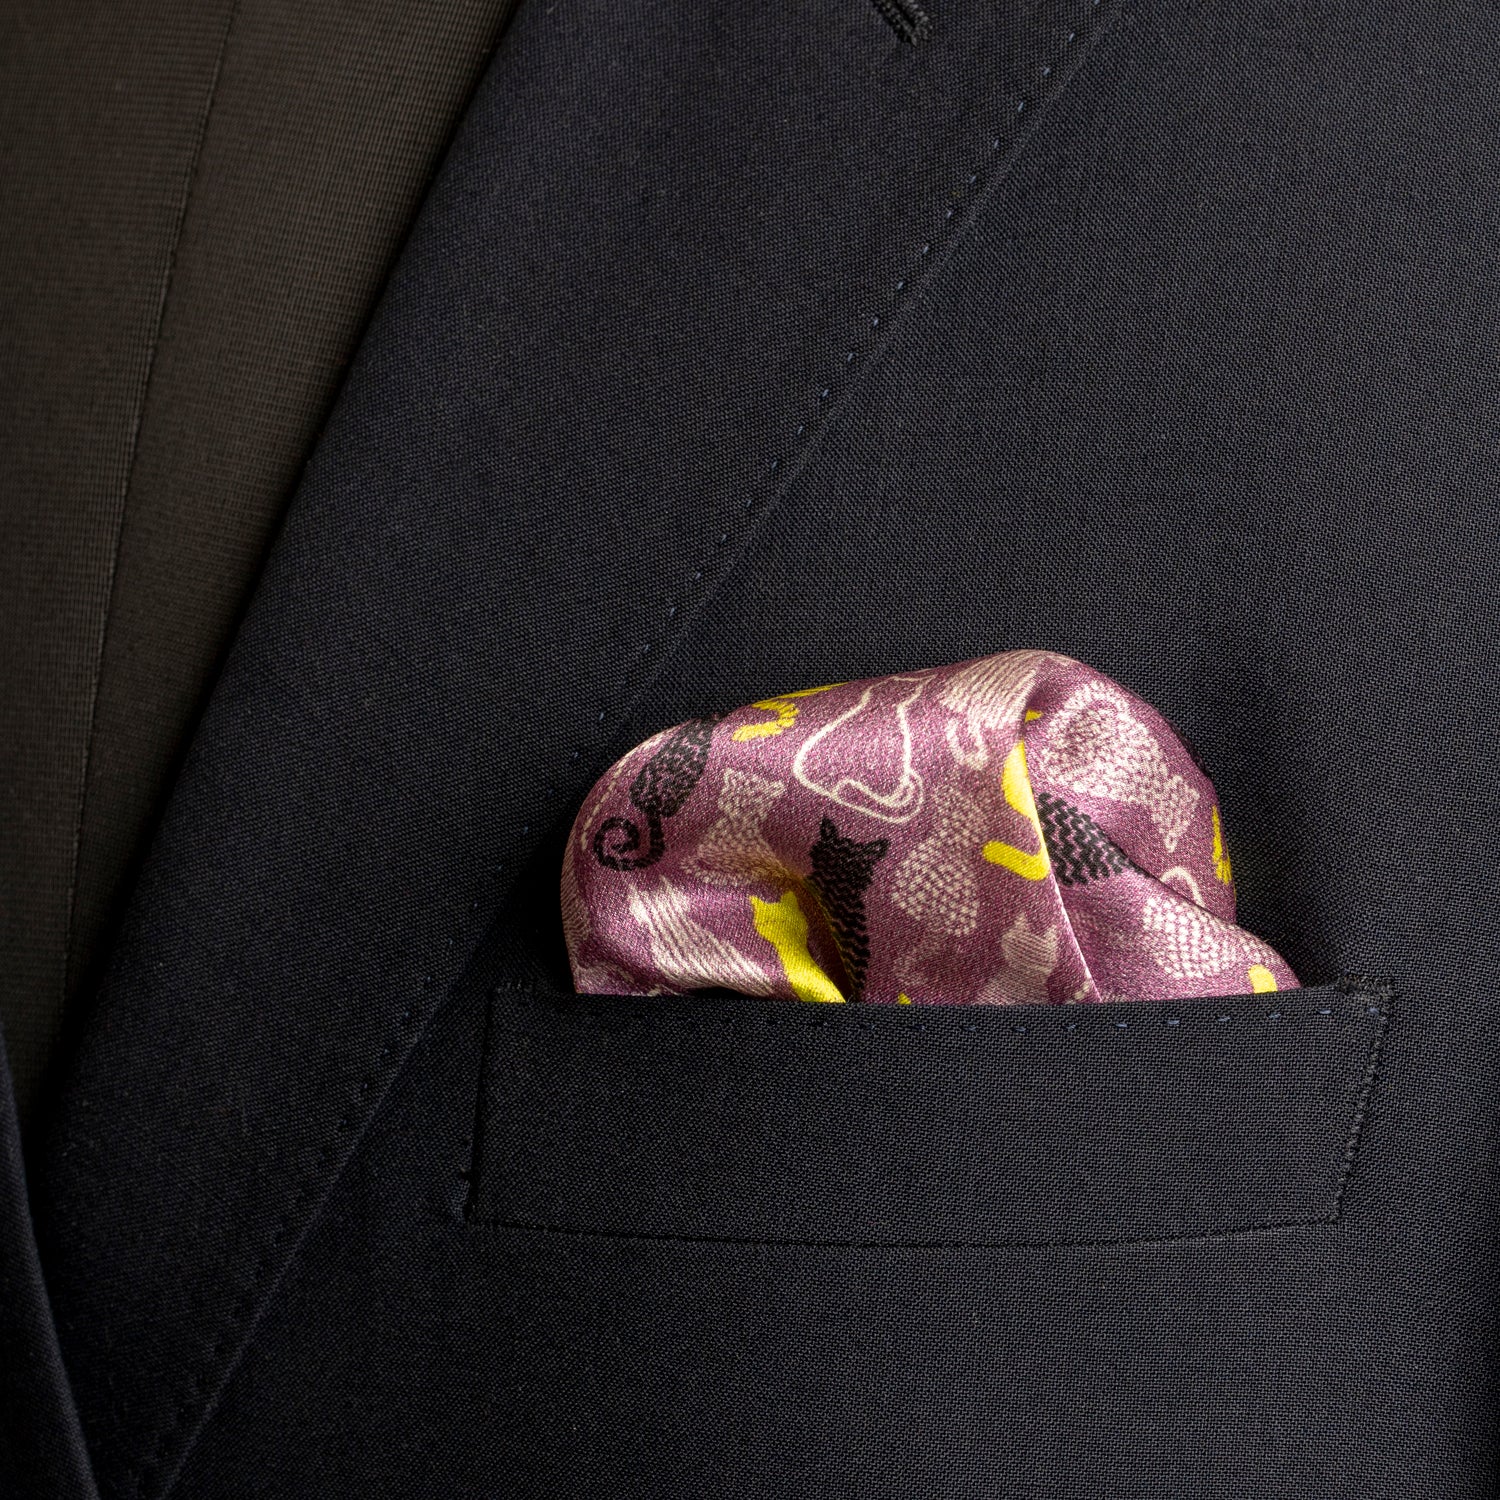 Chokore Mauve and Lime Green Satin Silk pocket square from the Wildlife Collection